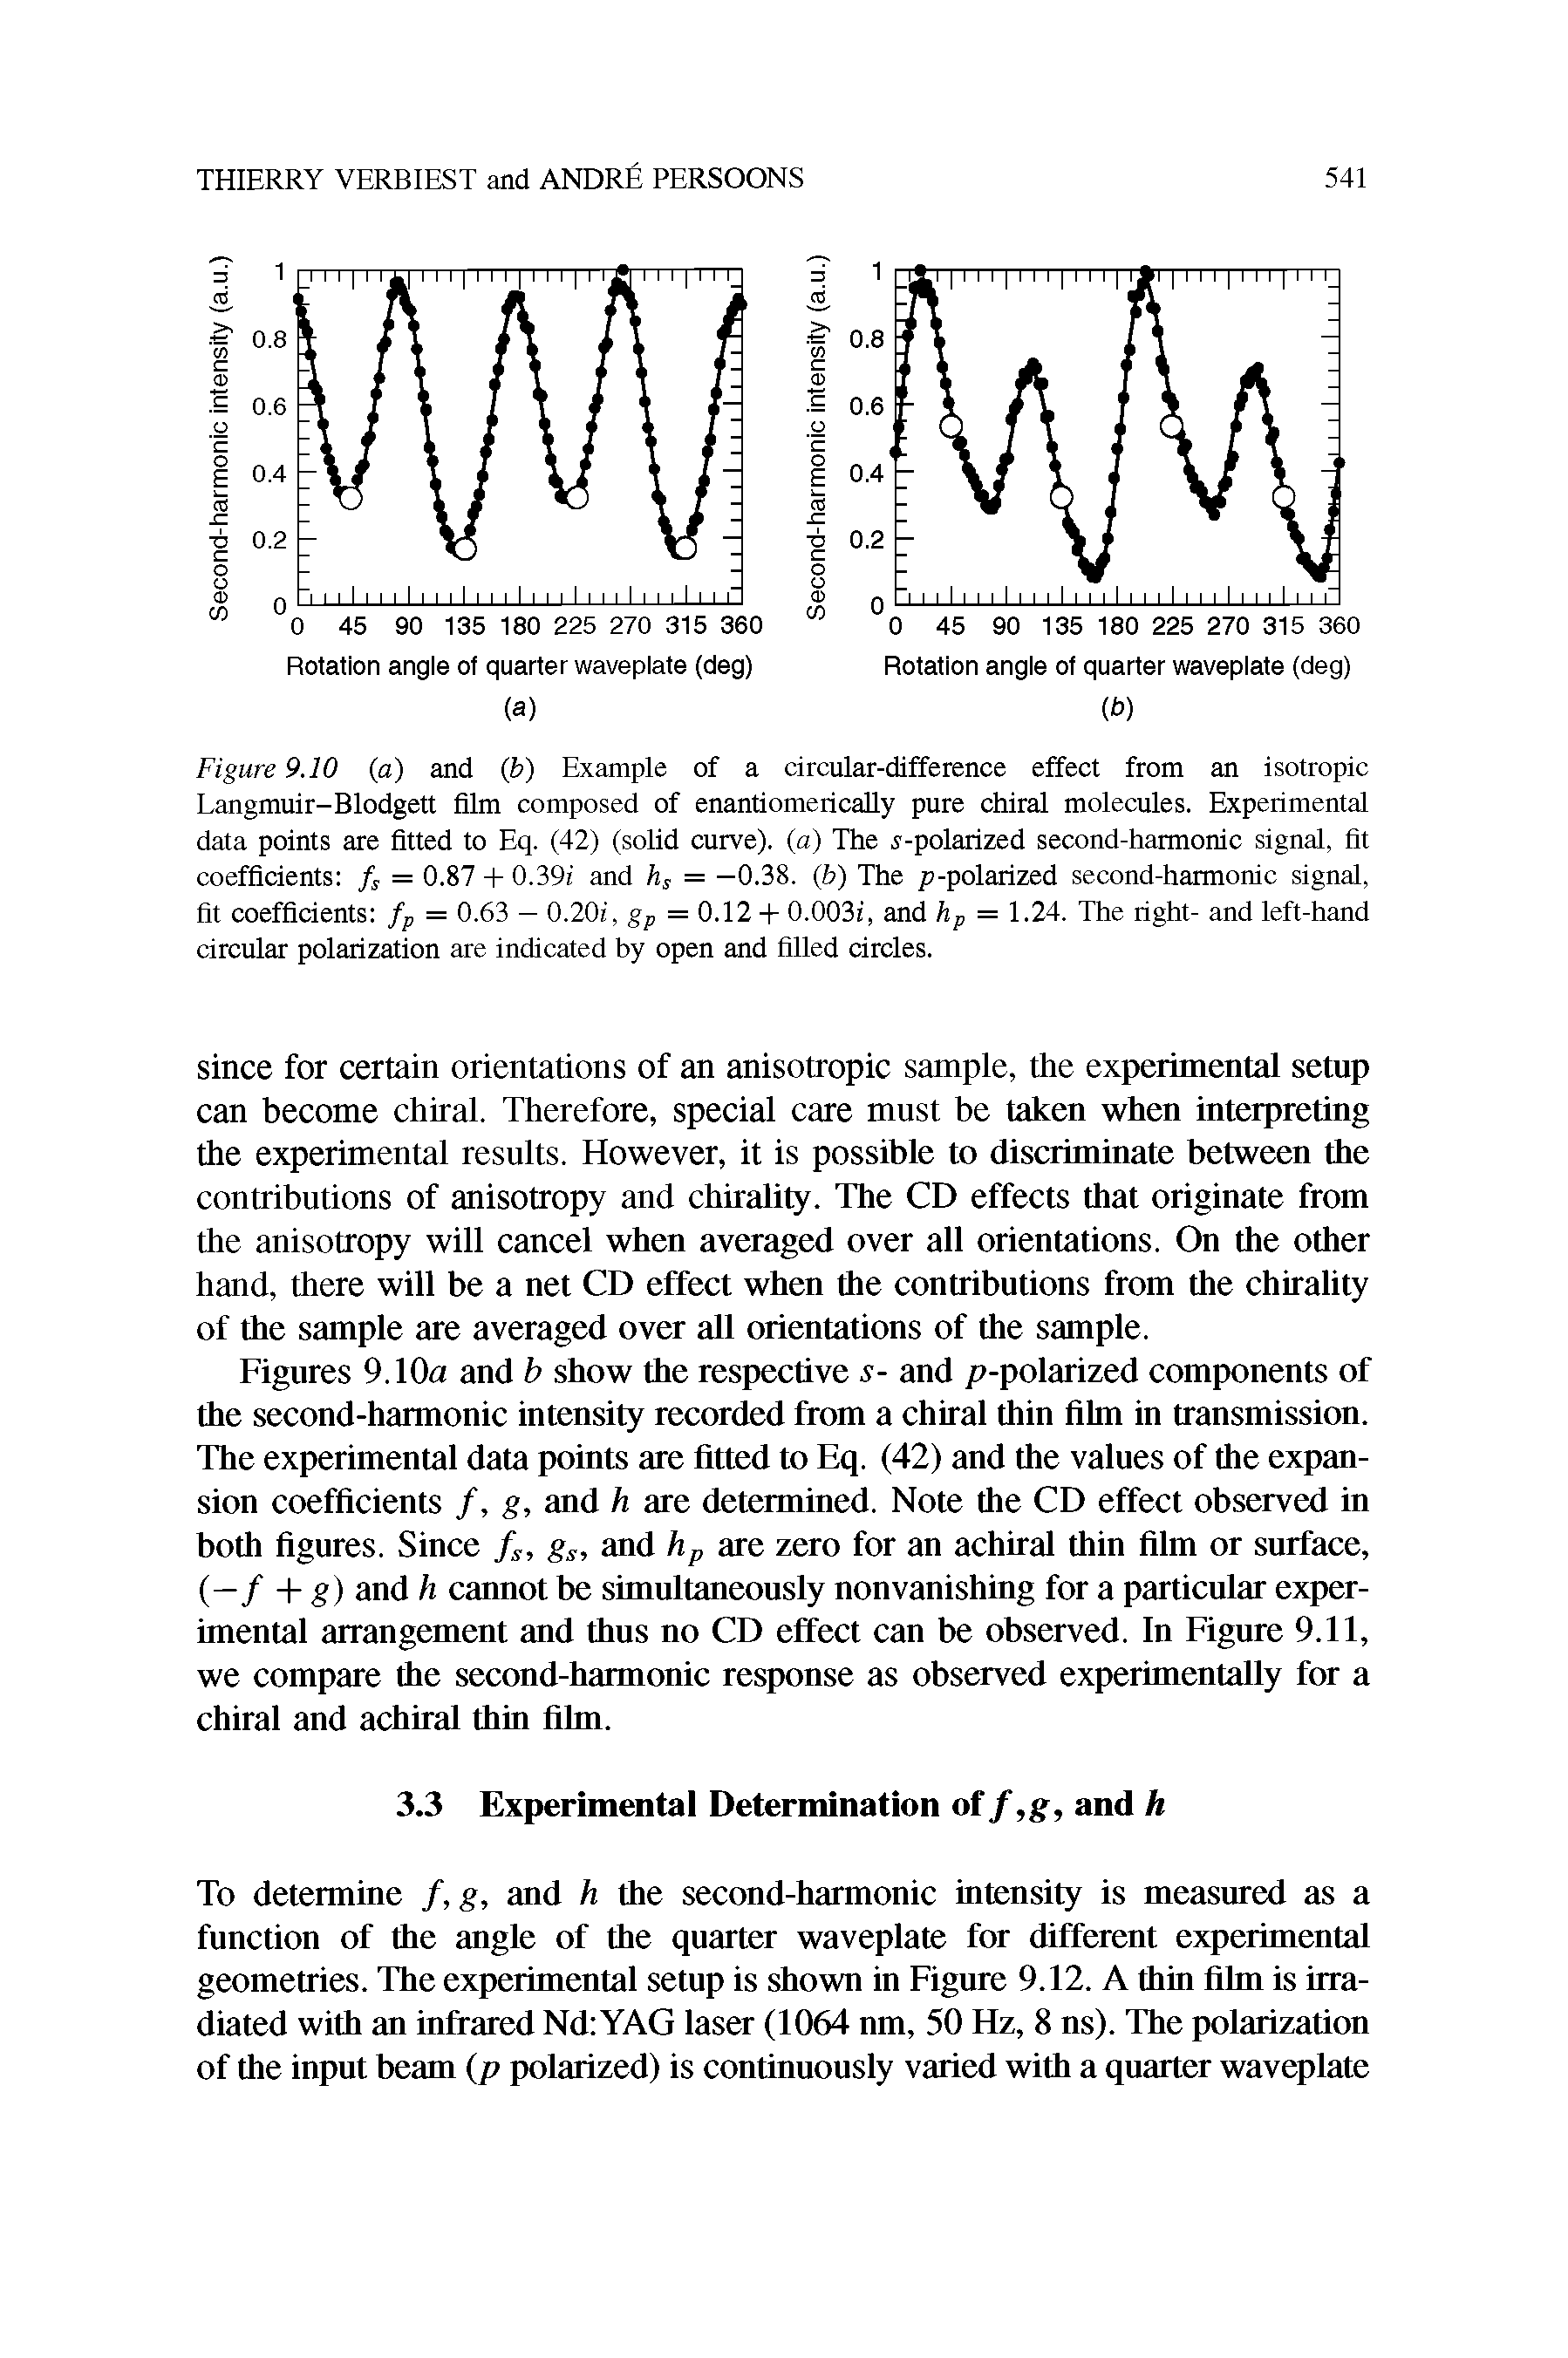 Figures 9.10a and b show the respective s- and p-polarized components of the second-harmonic intensity recorded from a chiral thin film in transmission. The experimental data points are fitted to Eq. (42) and the values of the expansion coefficients /, g, and h are determined. Note the CD effect observed in both figures. Since fs, gs, and hp are zero for an achiral thin film or surface, (—f+g) and h cannot be simultaneously non vanishing for a particular experimental arrangement and thus no CD effect can be observed. In Figure 9.11, we compare the second-harmonic response as observed experimentally for a chiral and achiral thin film.